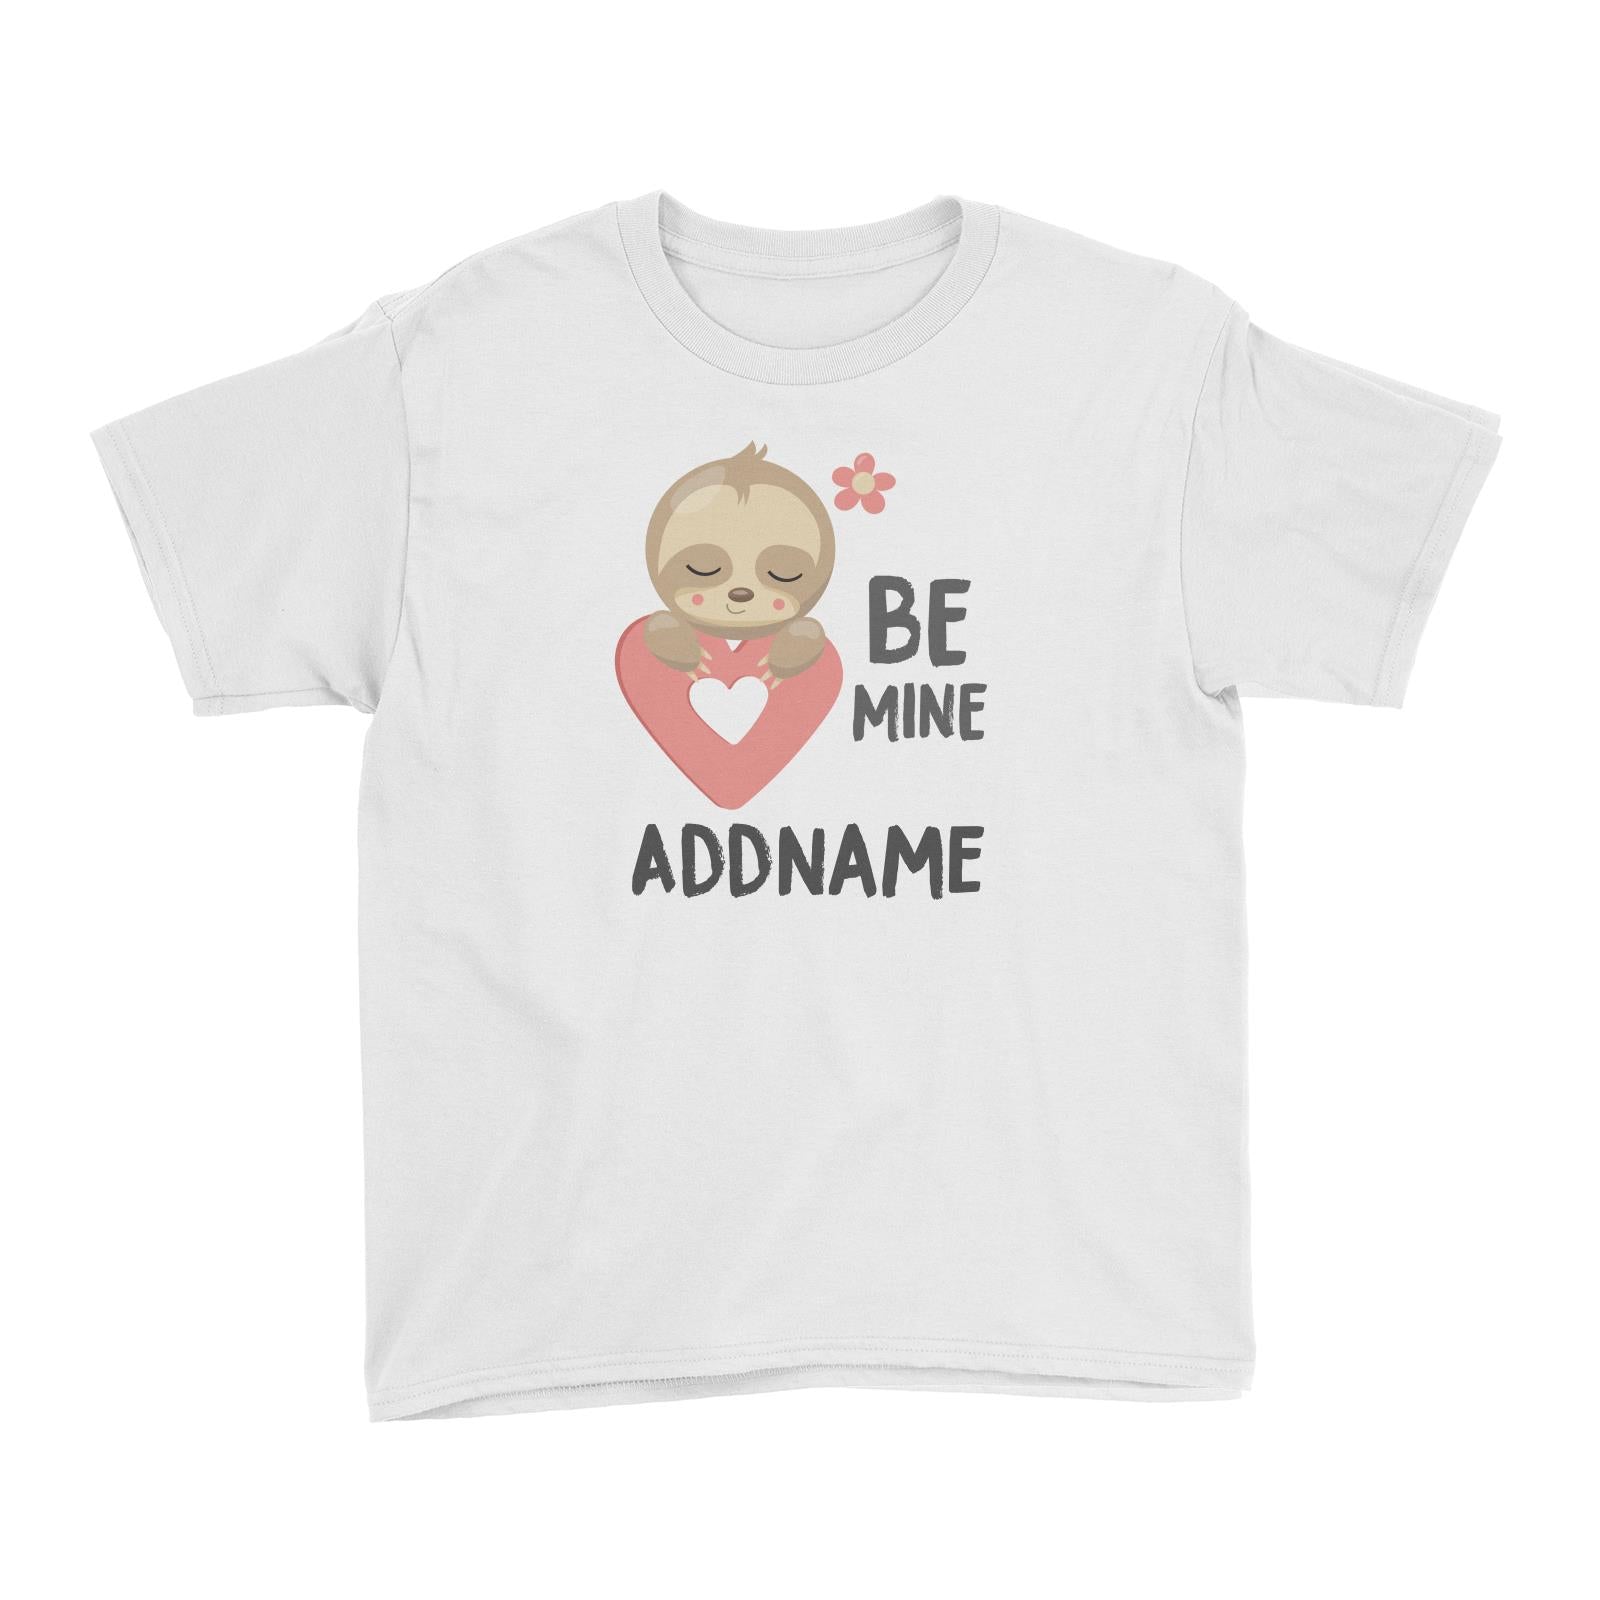 Cute Sloth Be Mine with Heart Addname Kid's T-Shirt